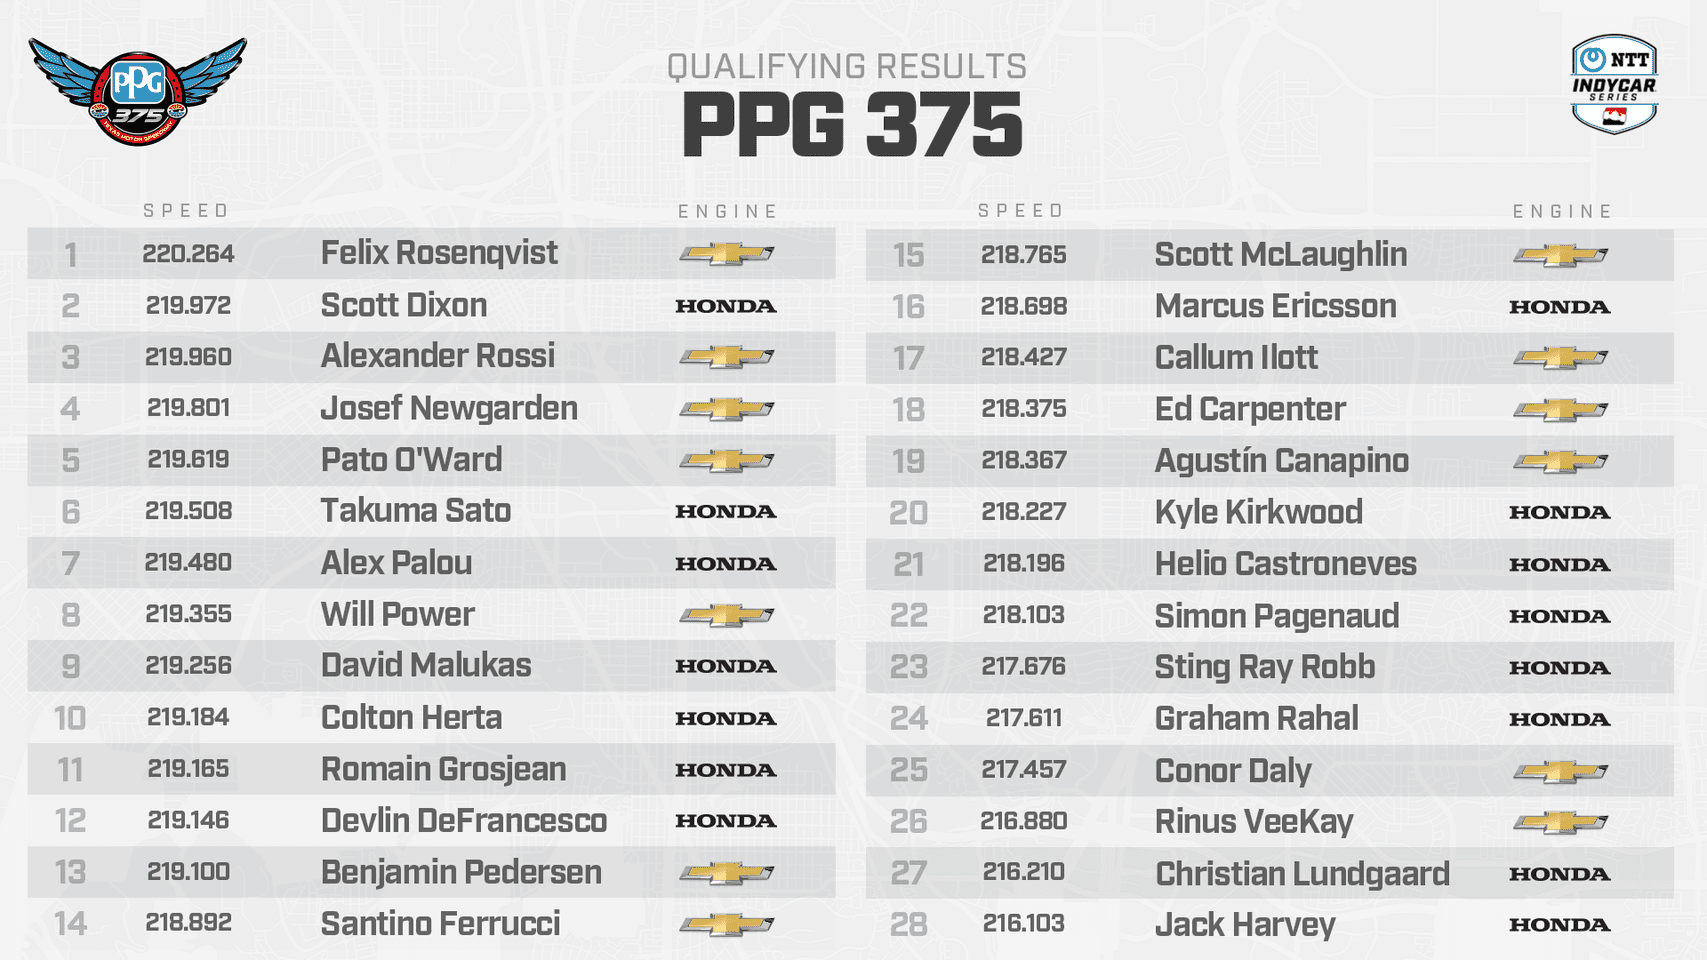 Ntt indycar qualifying results, 2023 ppg 375 at texas motor speedway